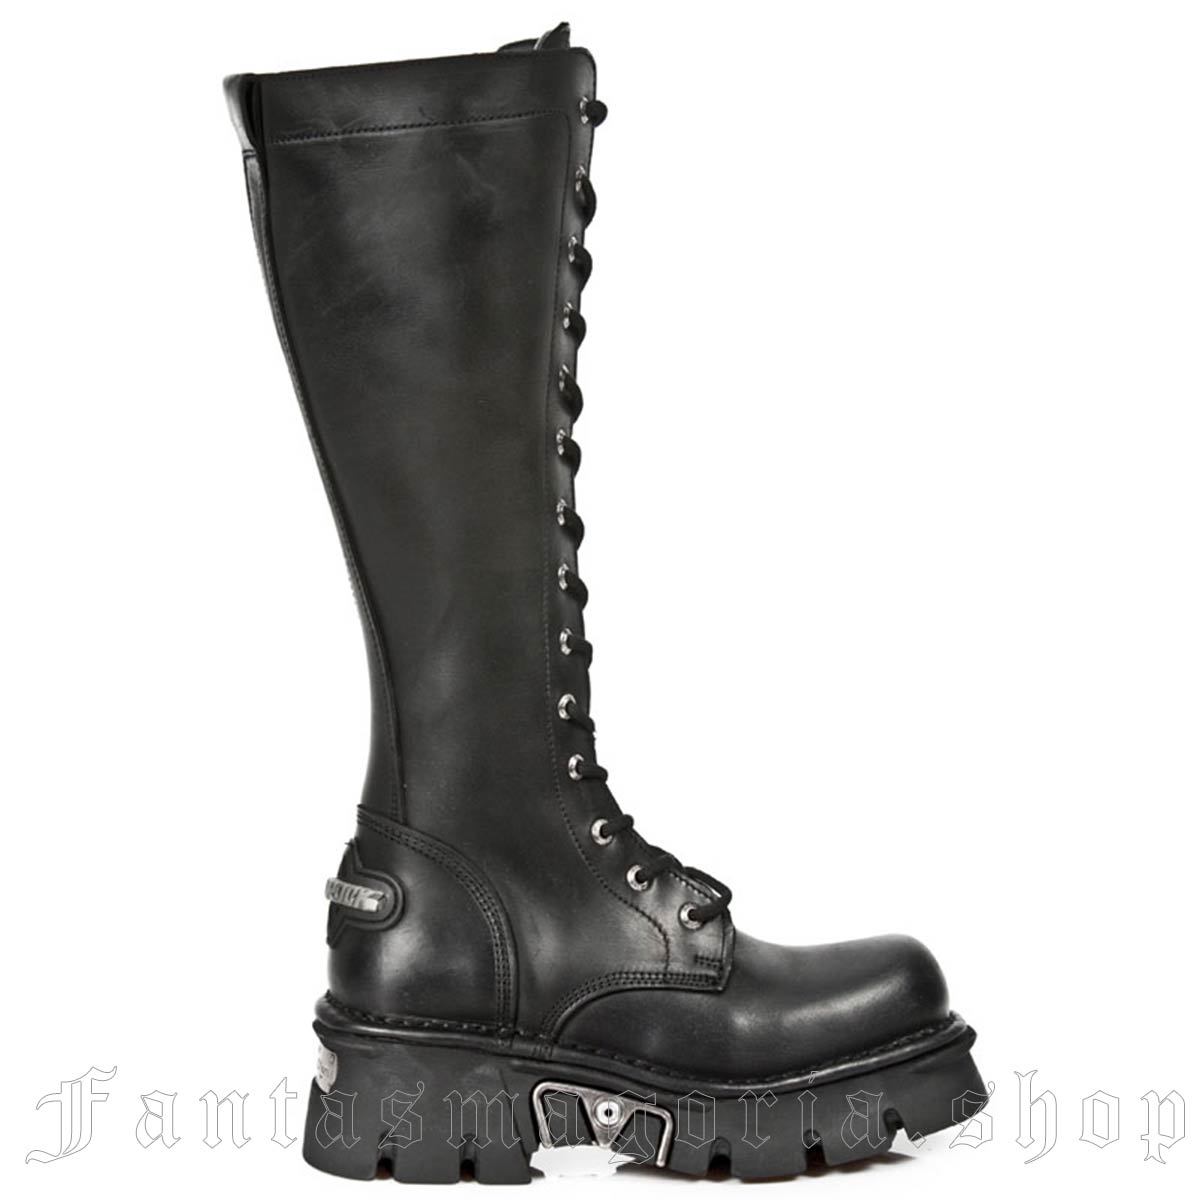 Punk chunky sole metallic detailing natural black leather lace-up zip-up knee-high combat boots. - New Rock - 235-S1